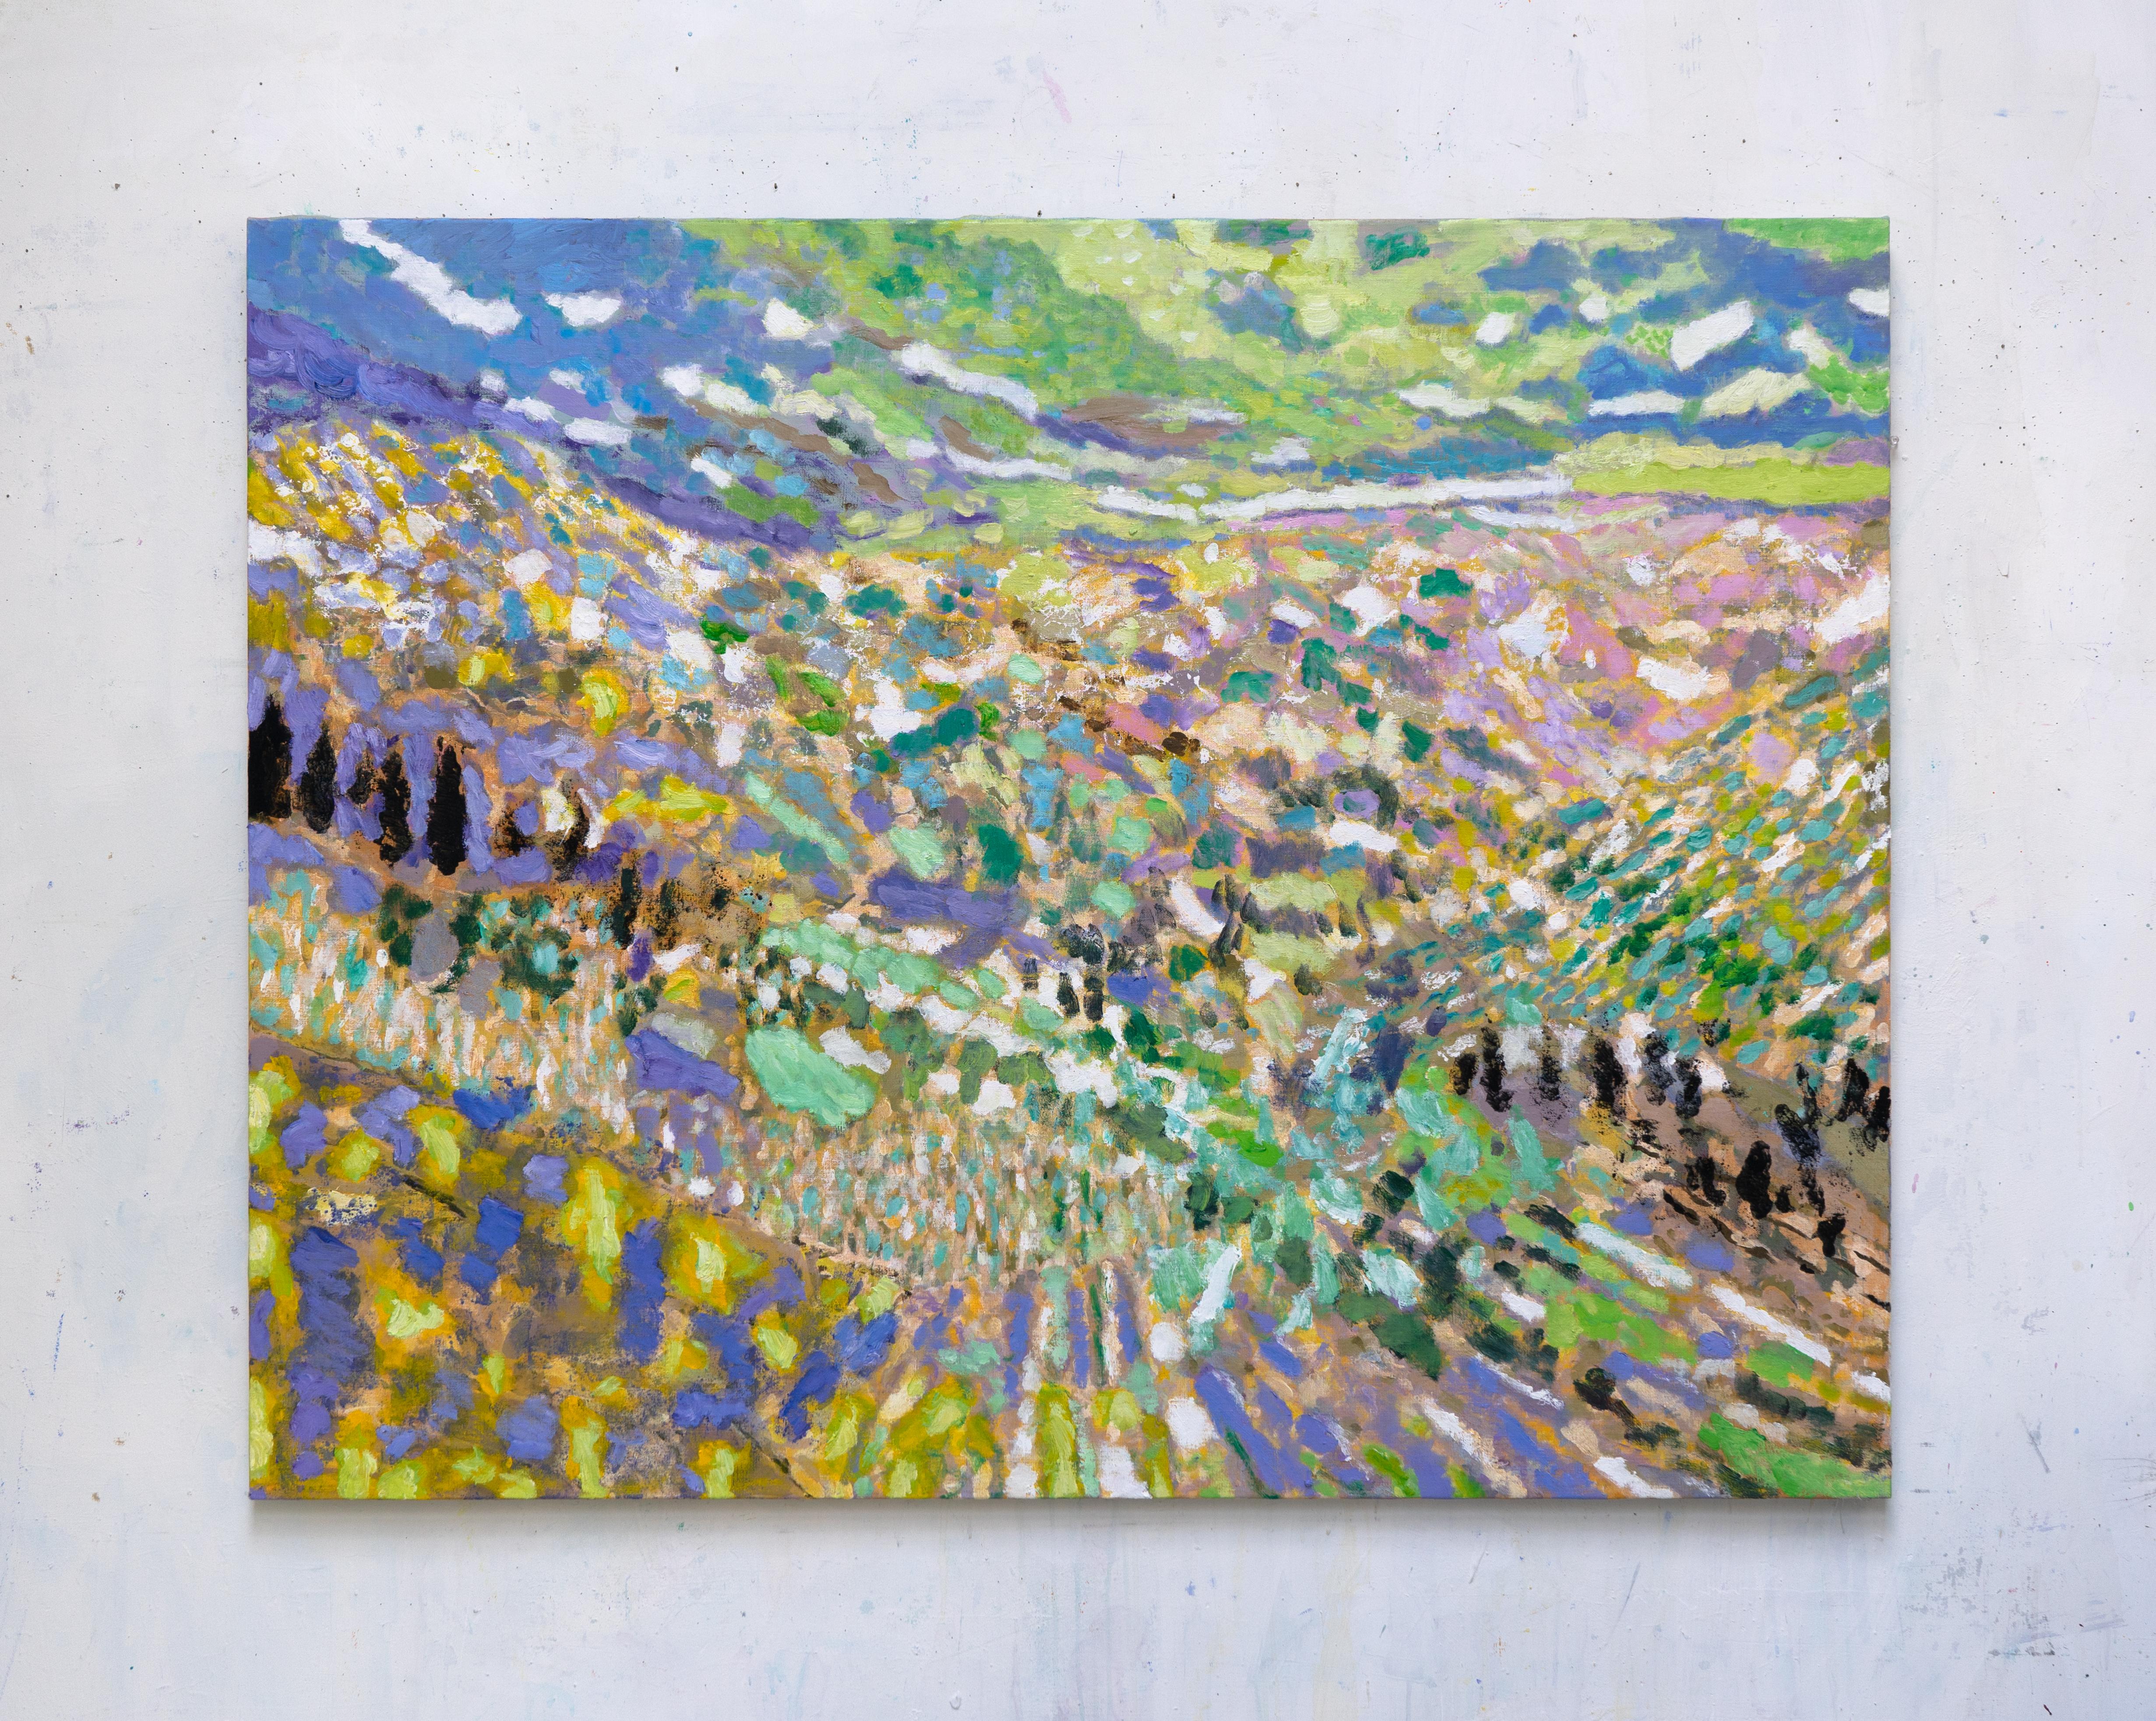 Cévennes/Landscape of the French Cevennes - Painting by Marc Tanguy